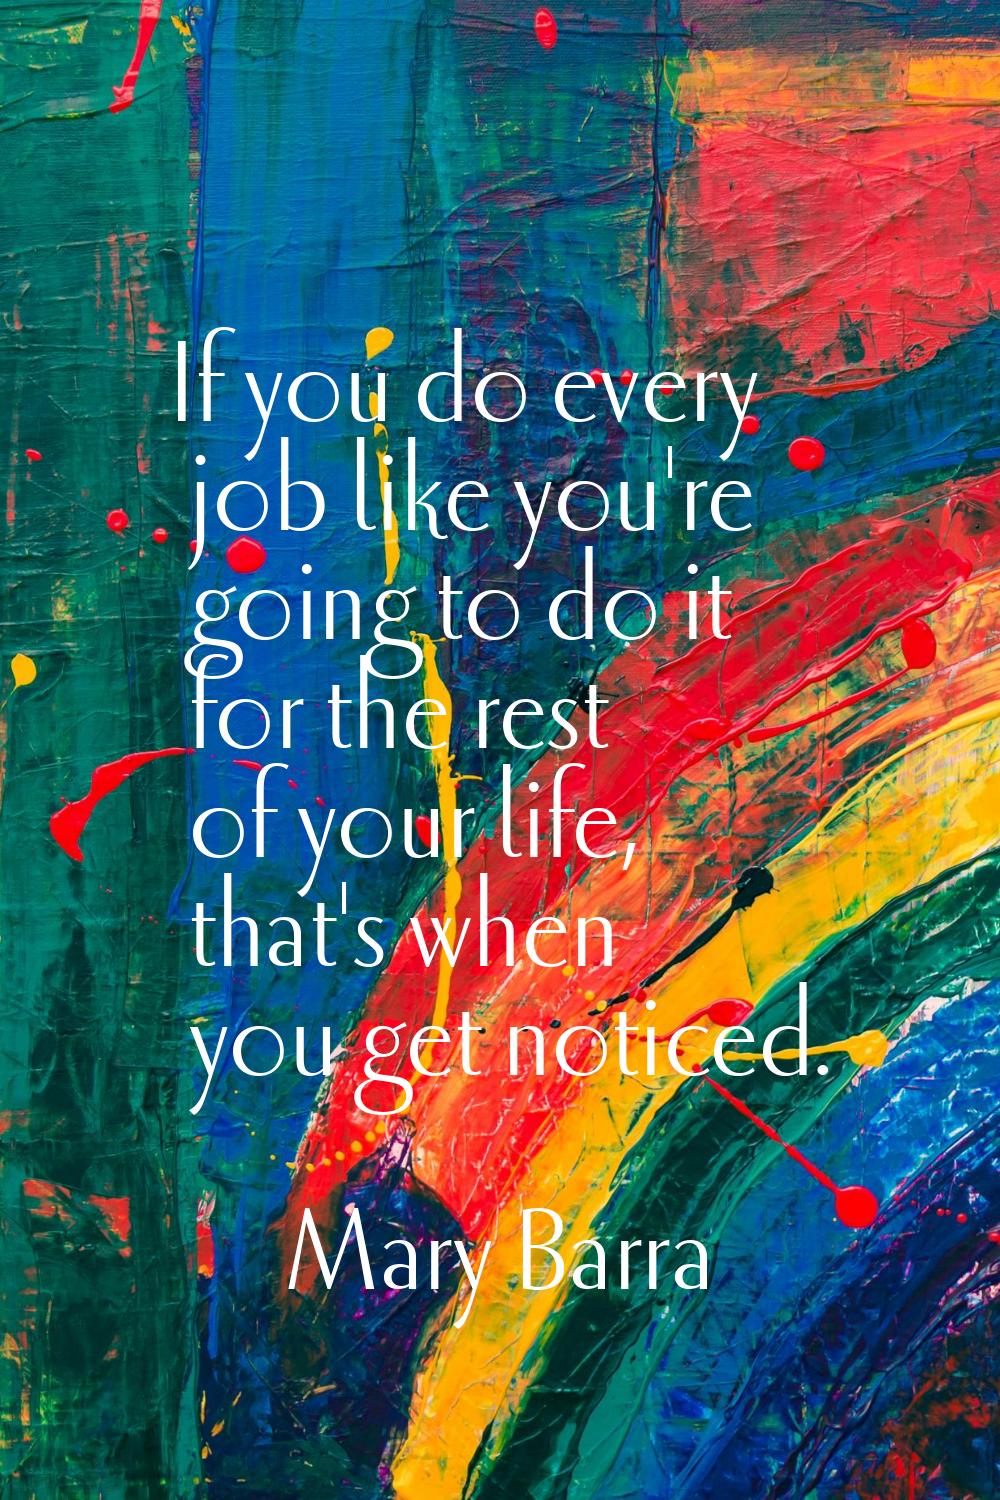 If you do every job like you're going to do it for the rest of your life, that's when you get notic